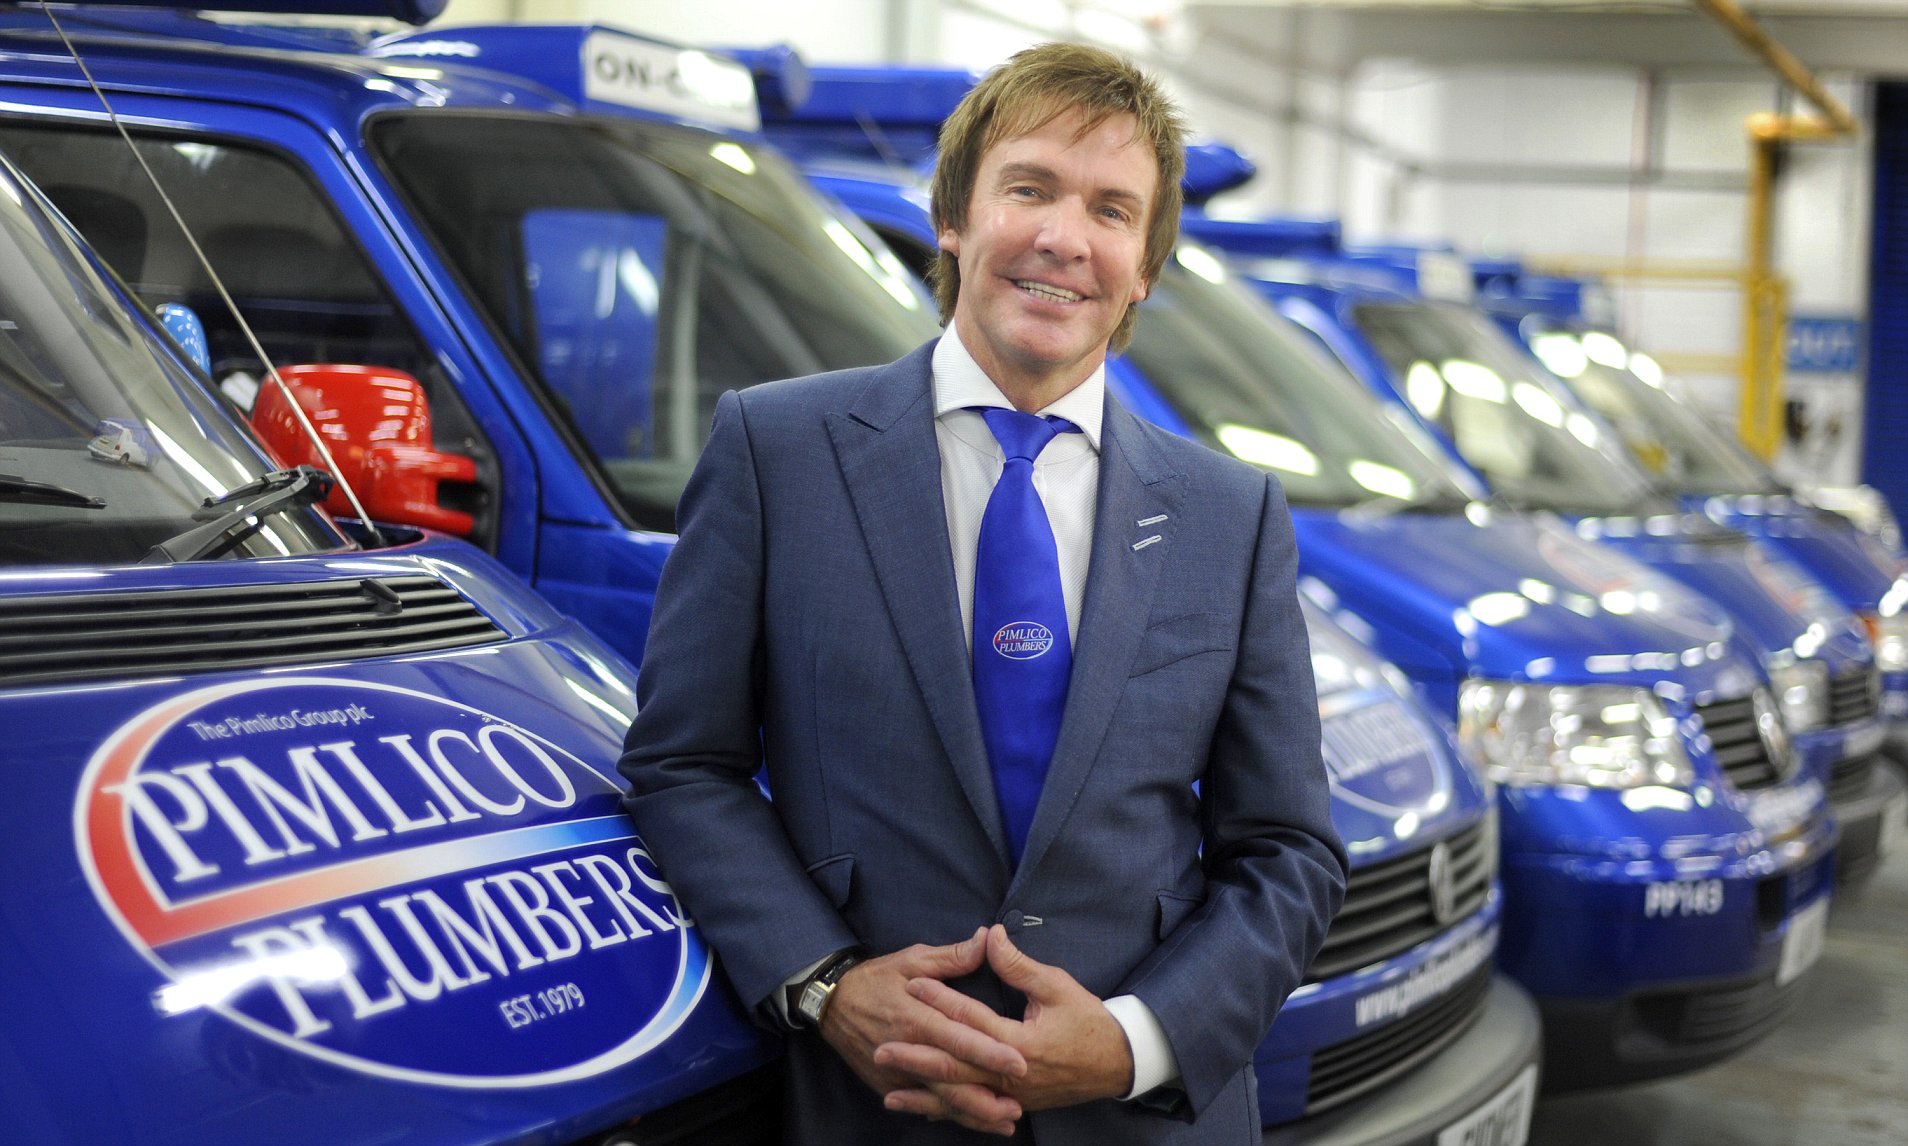 Pimlico Plumbers Acquired By Neighborly